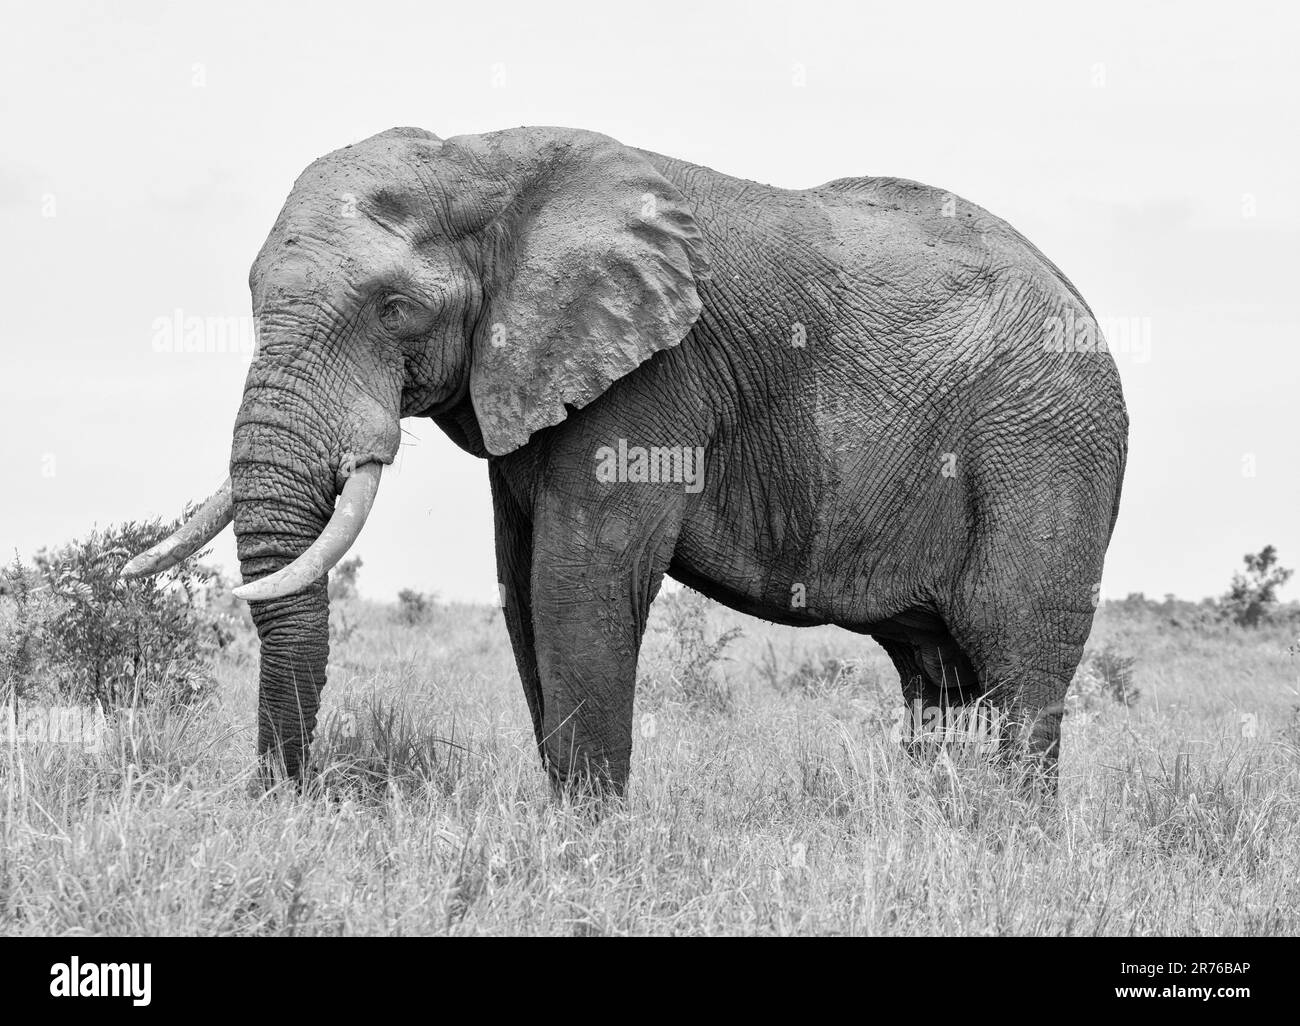 An African Elephant bull in Southern African savannah Stock Photo